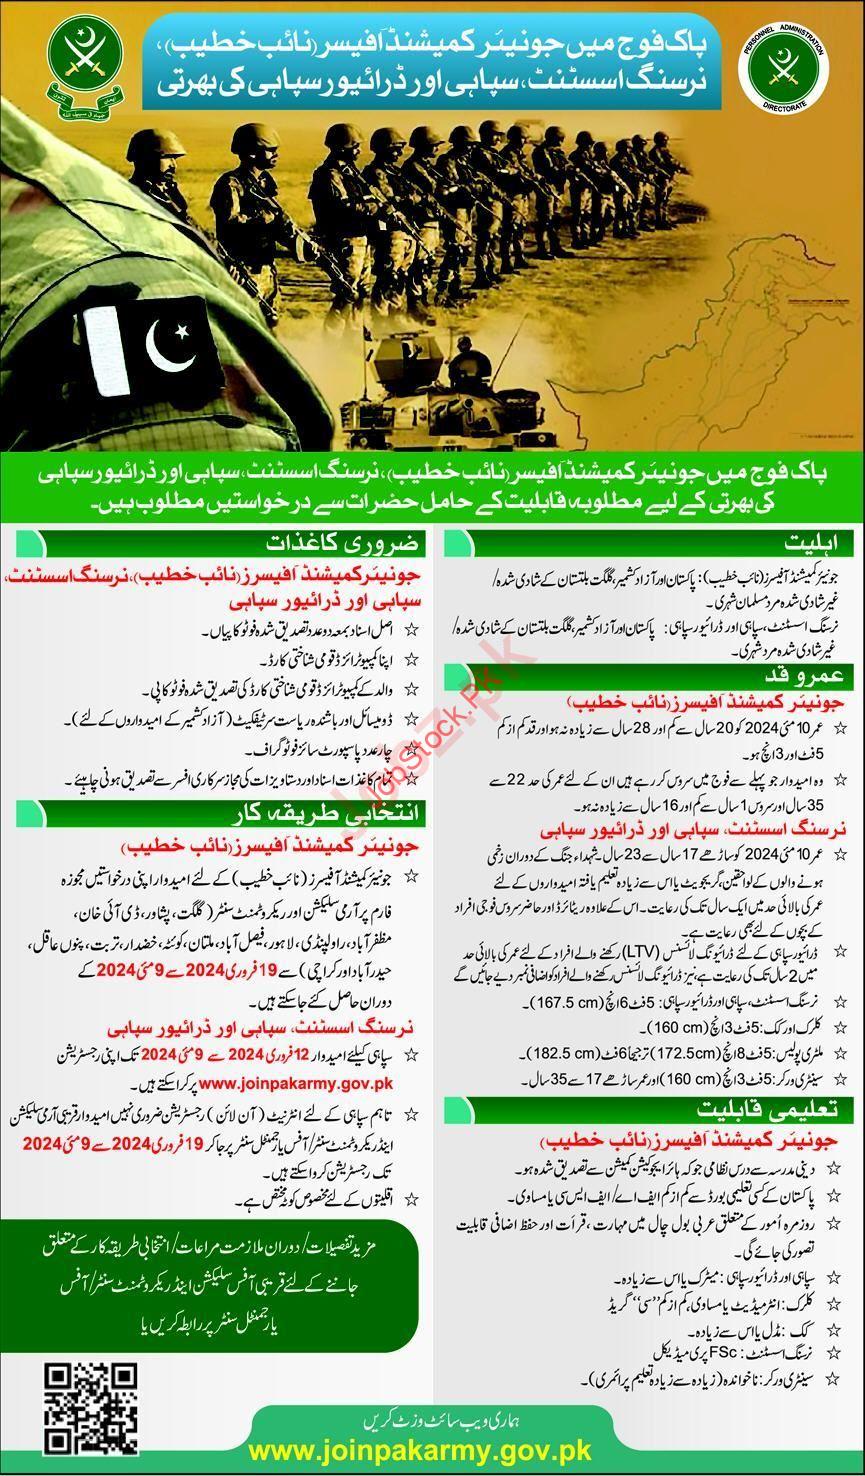 Join Pakistan Army as Junior Commissioned Officer